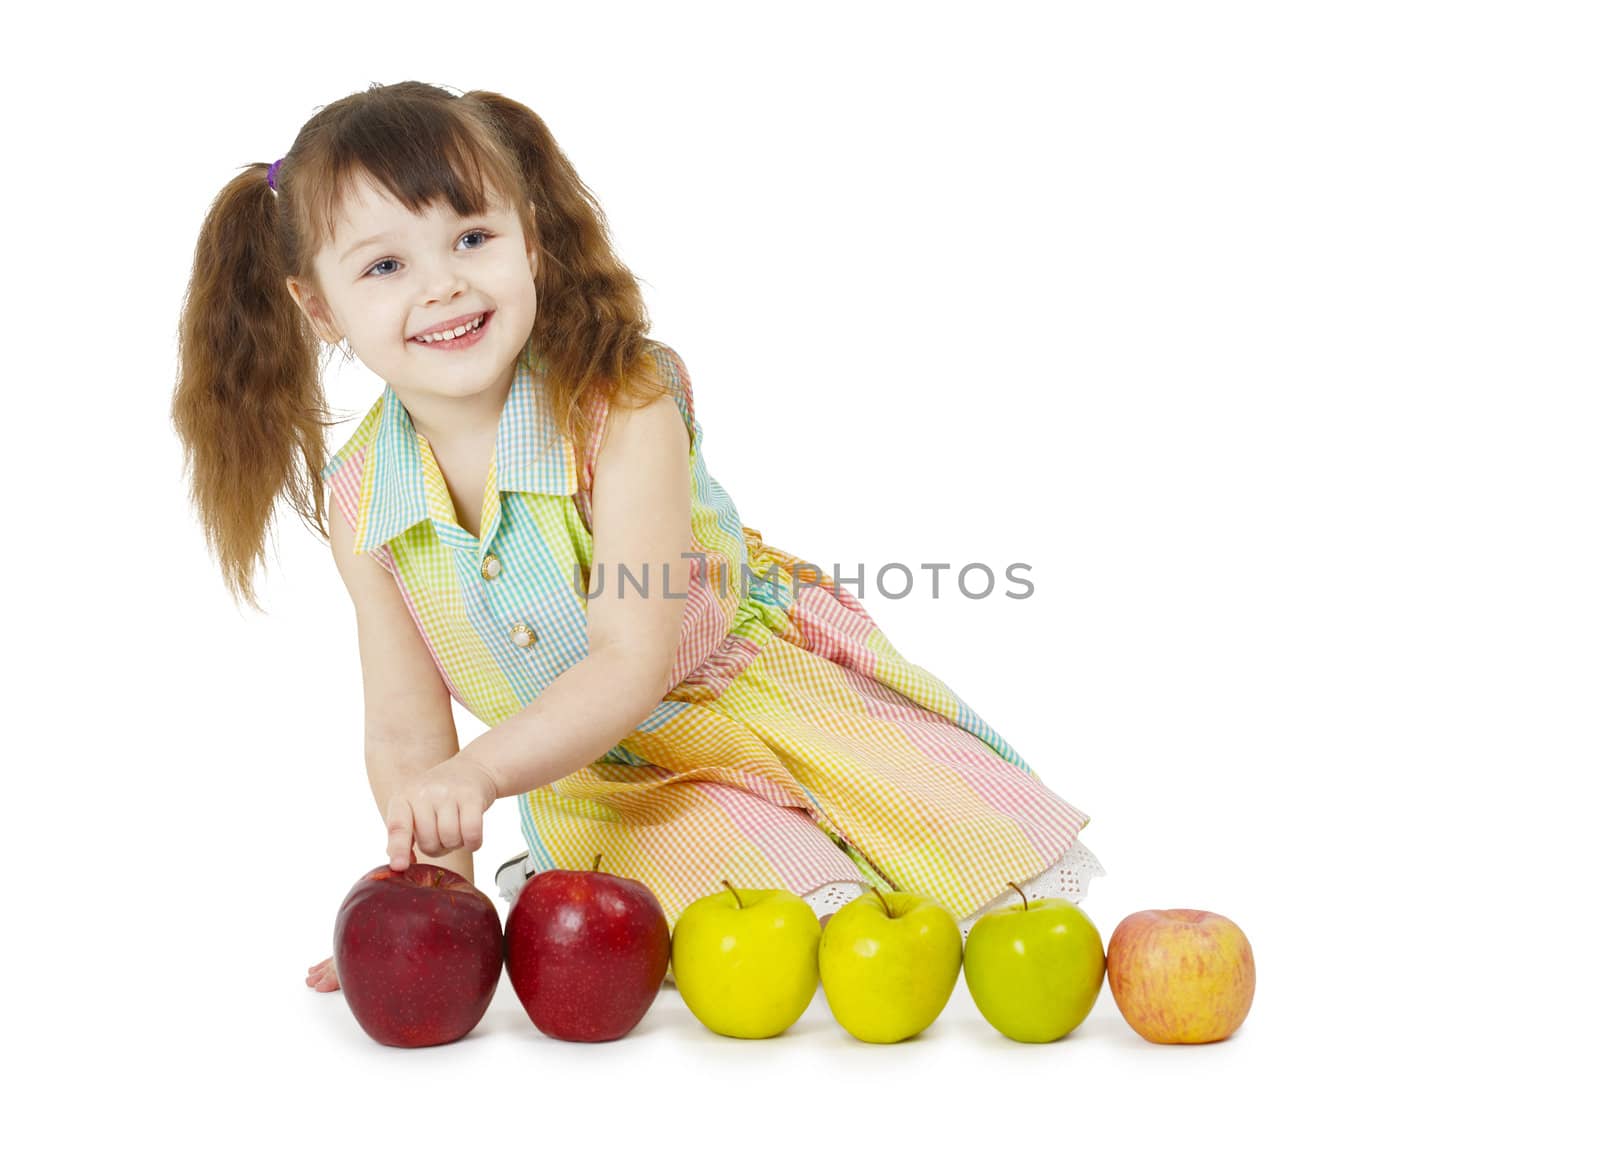 Little girl playing with fruits on a white background